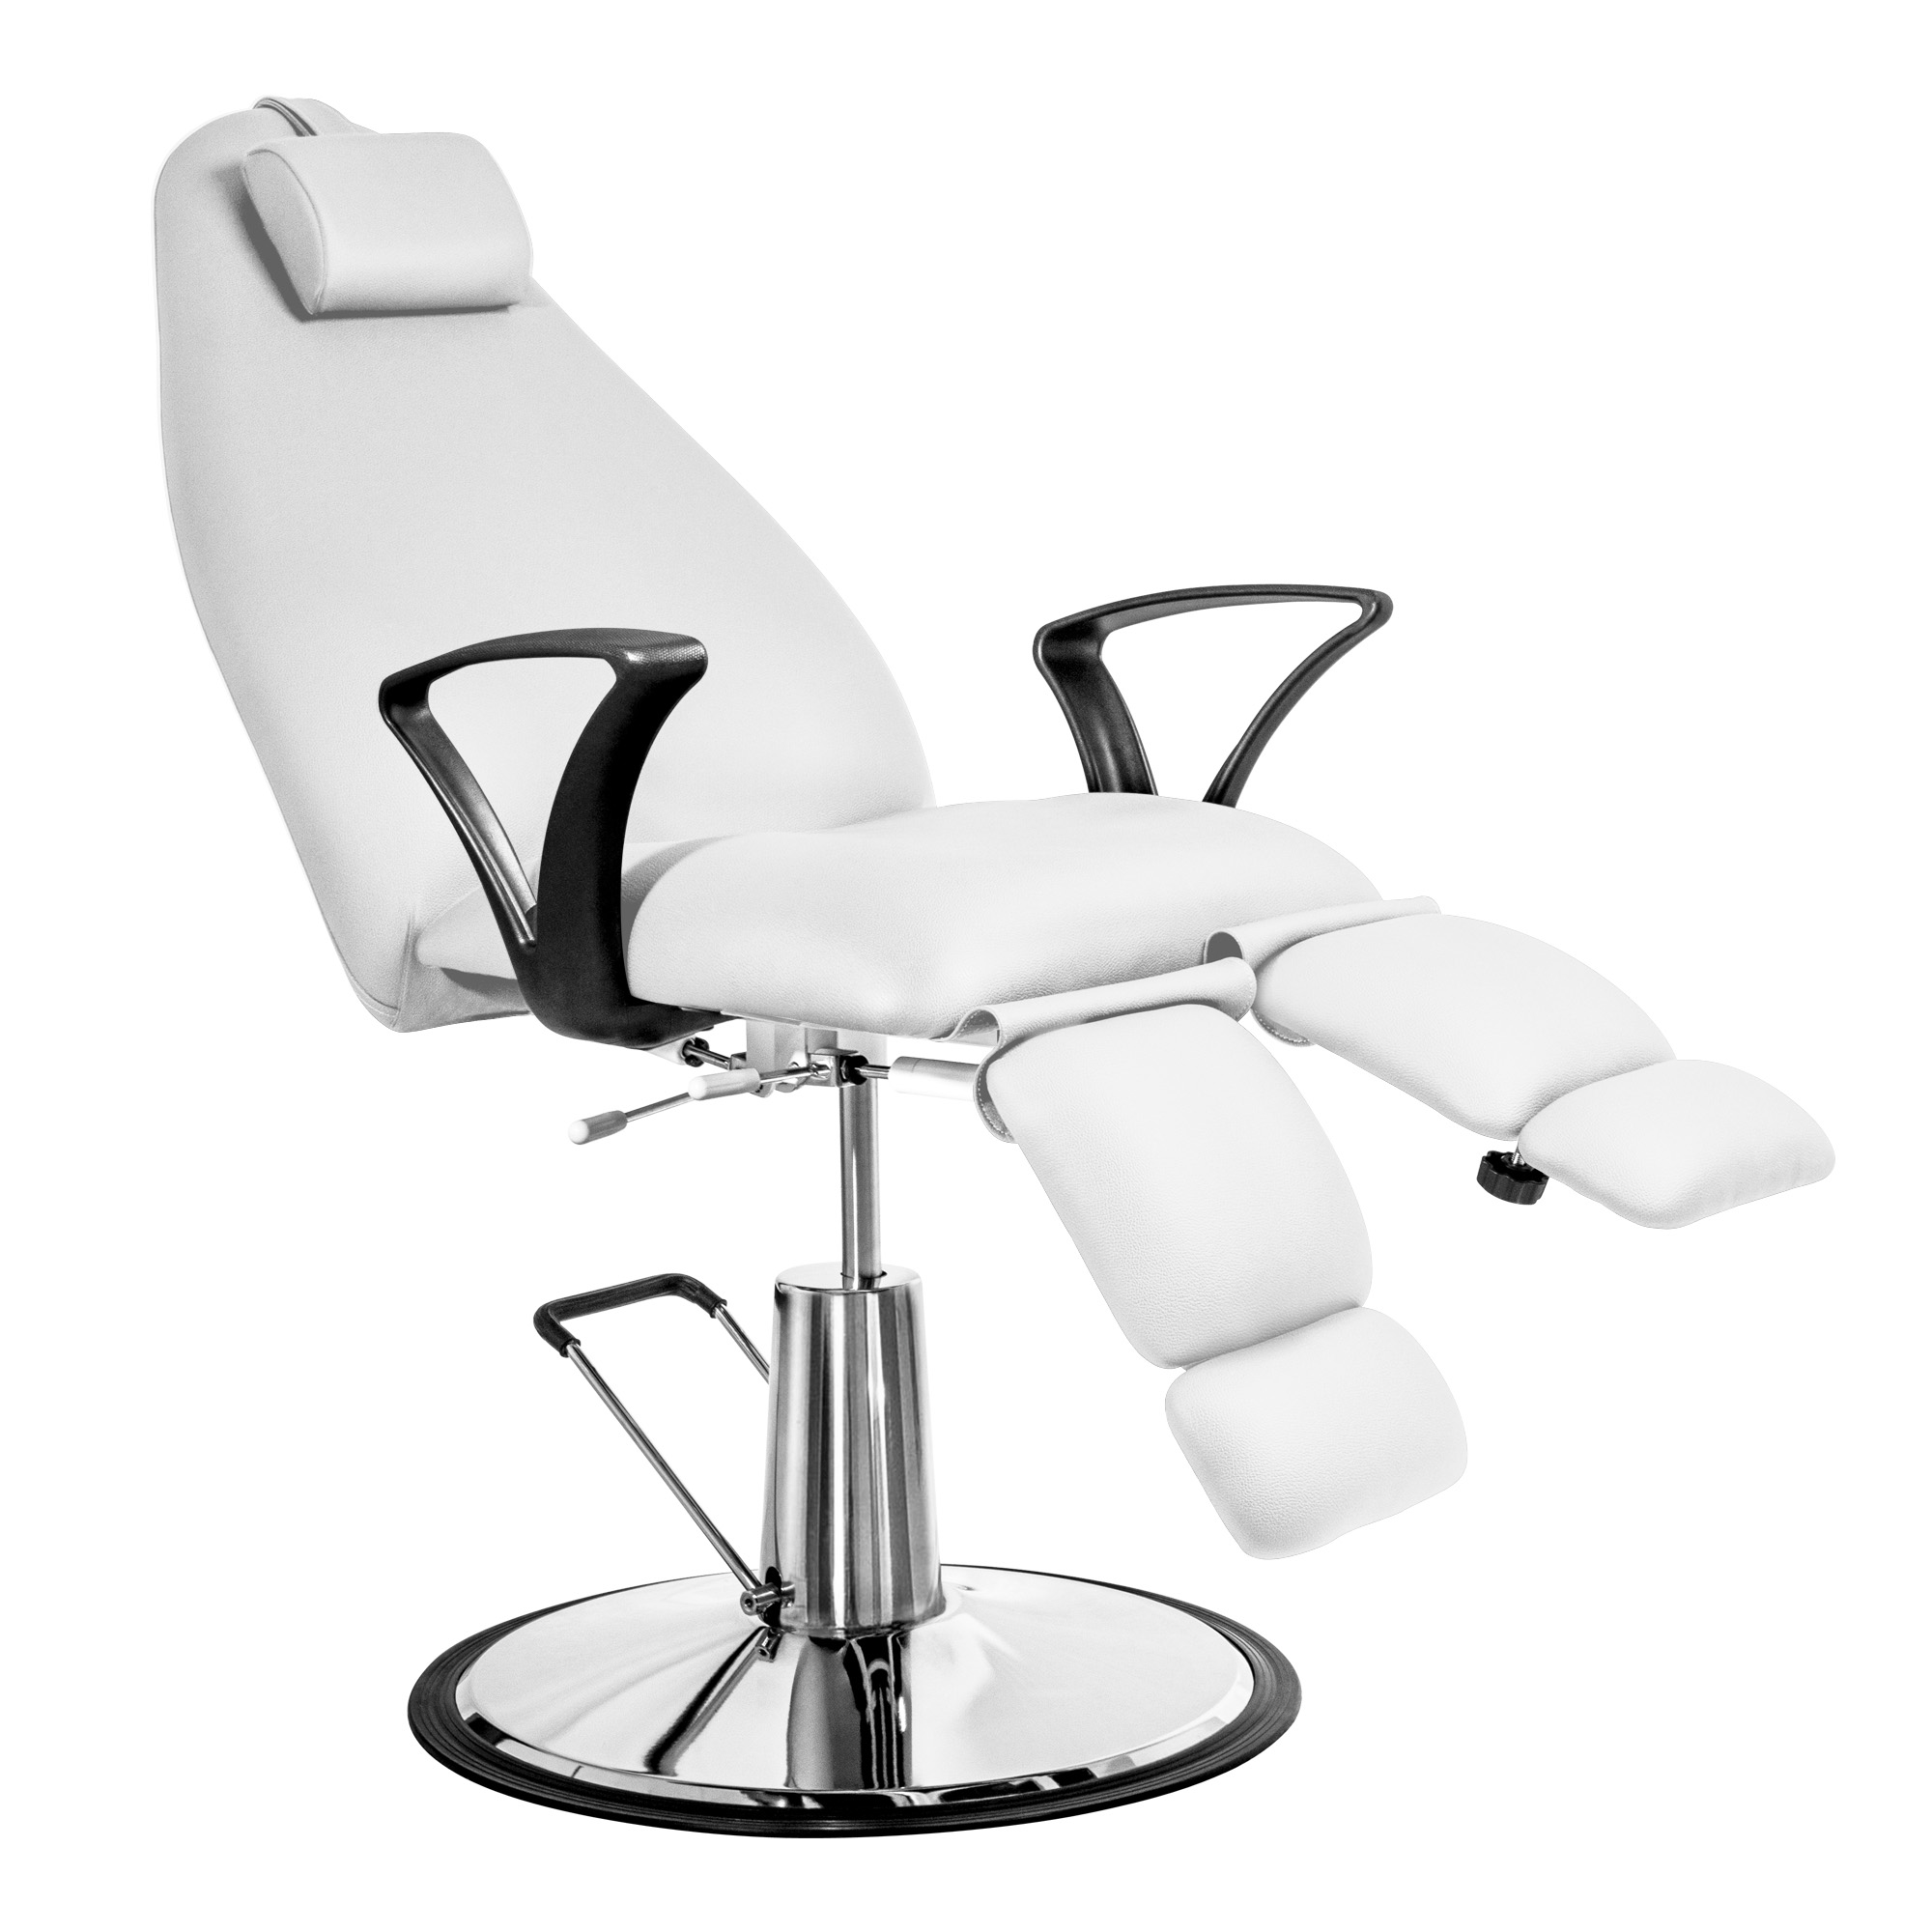 Hydraulic pedicure chair with fixed base white